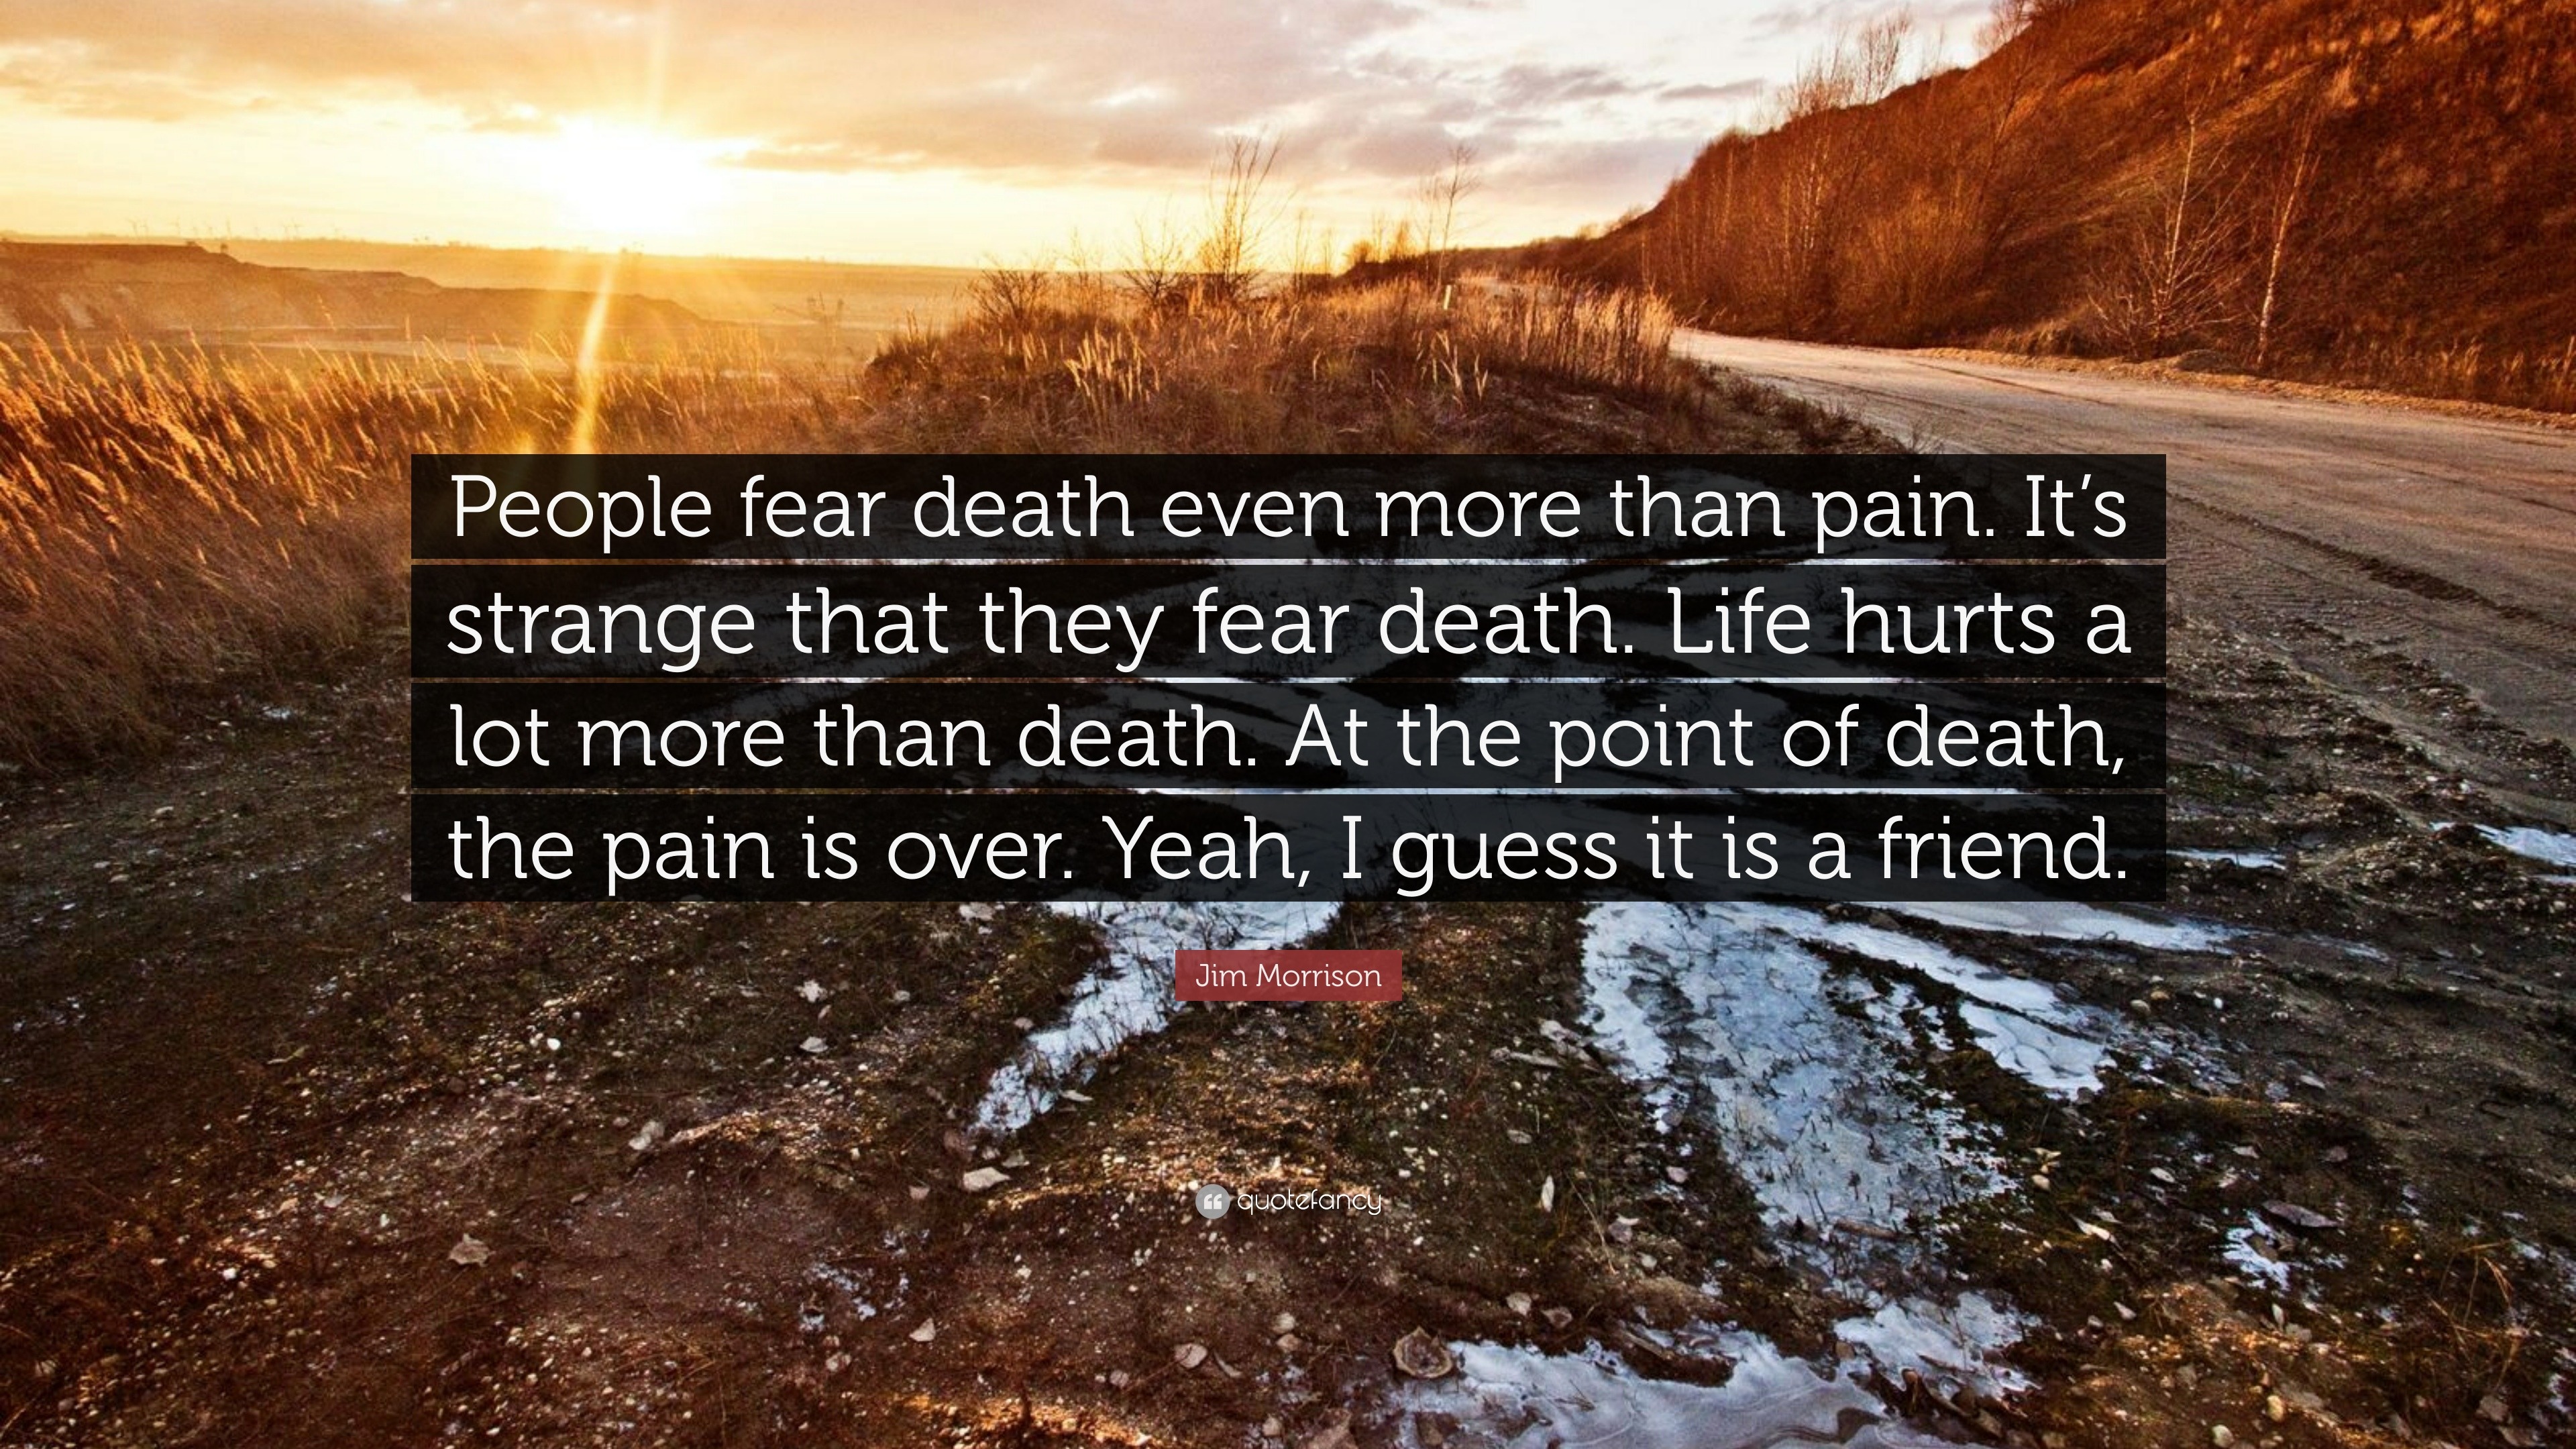 Jim Morrison Quote “People fear even more than pain It s strange that